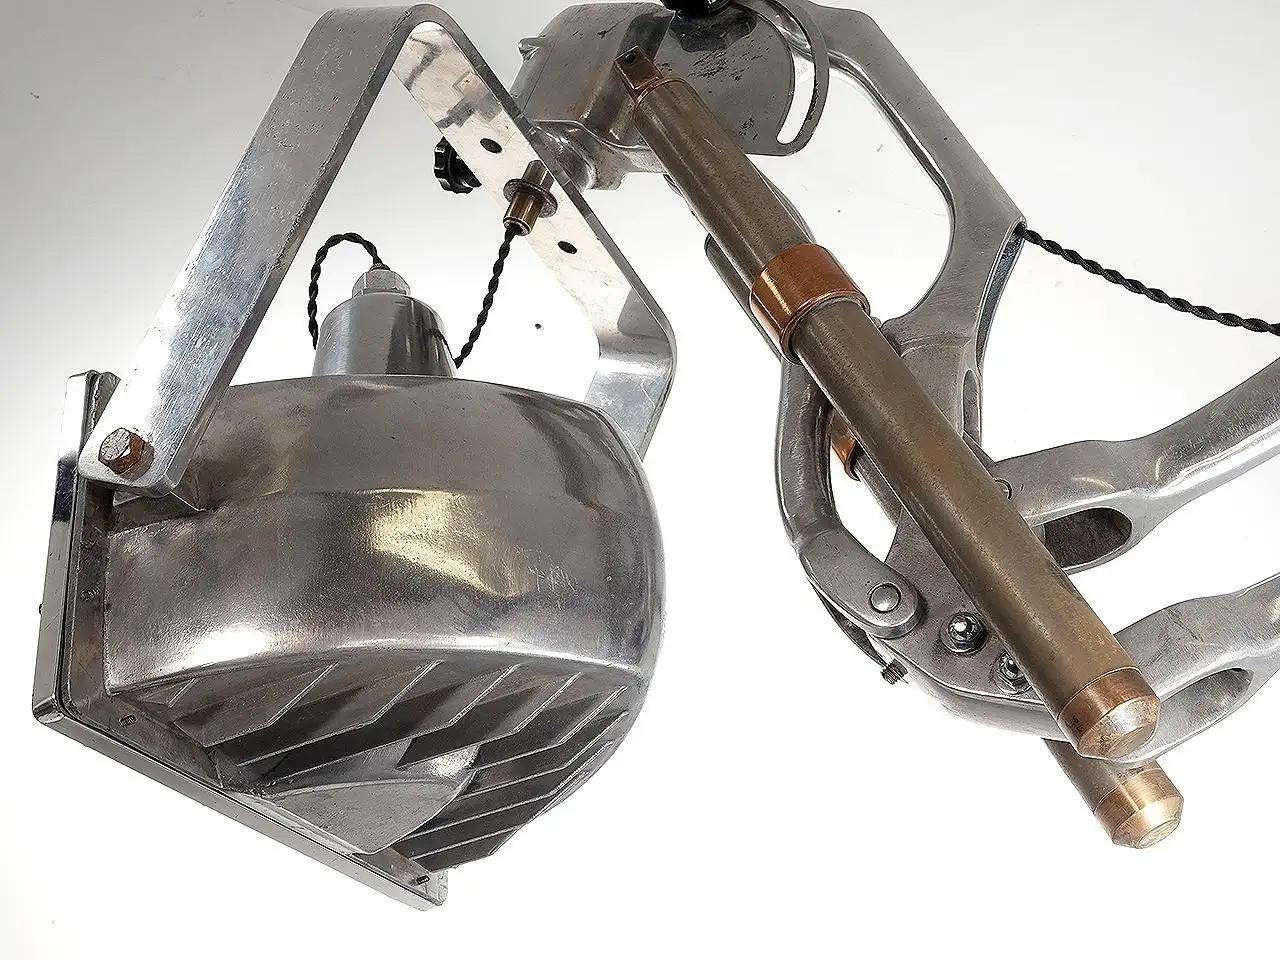 This impressive lamp started life as a 1930s X-ray machine. The head Was an aluminum spot lite that we fit to the heavy duty arm. The articulated arm and lamp were polished to a bright finish. The arm extends to over 5 foot and folds to the wall.